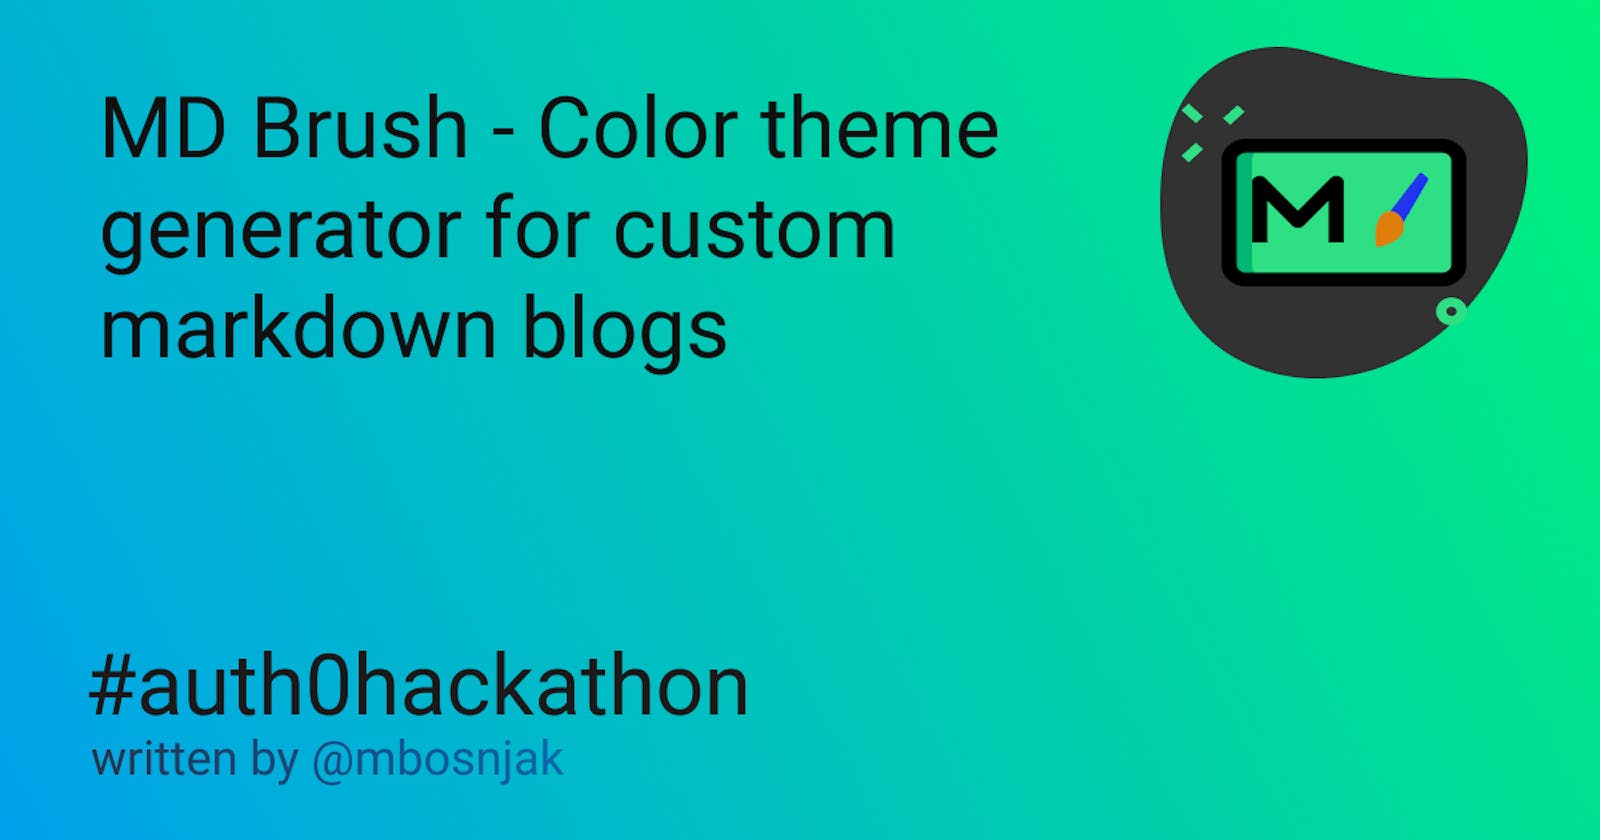 MD Brush - Color theme generator for your markdown blog